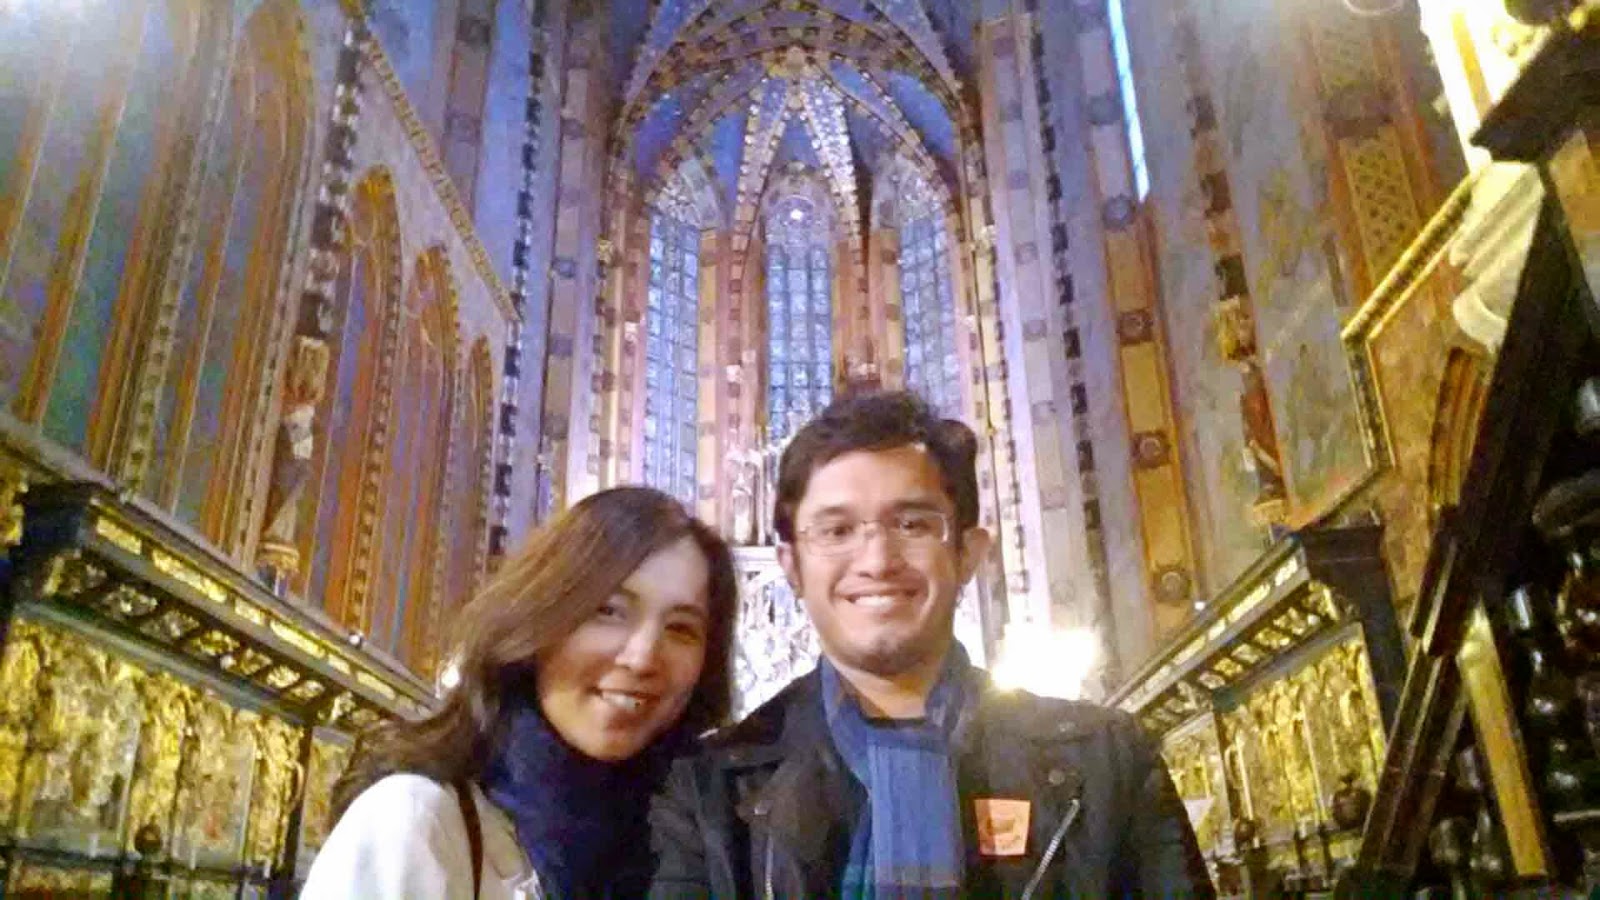 Selfie at St. Mary's Basilica Altar